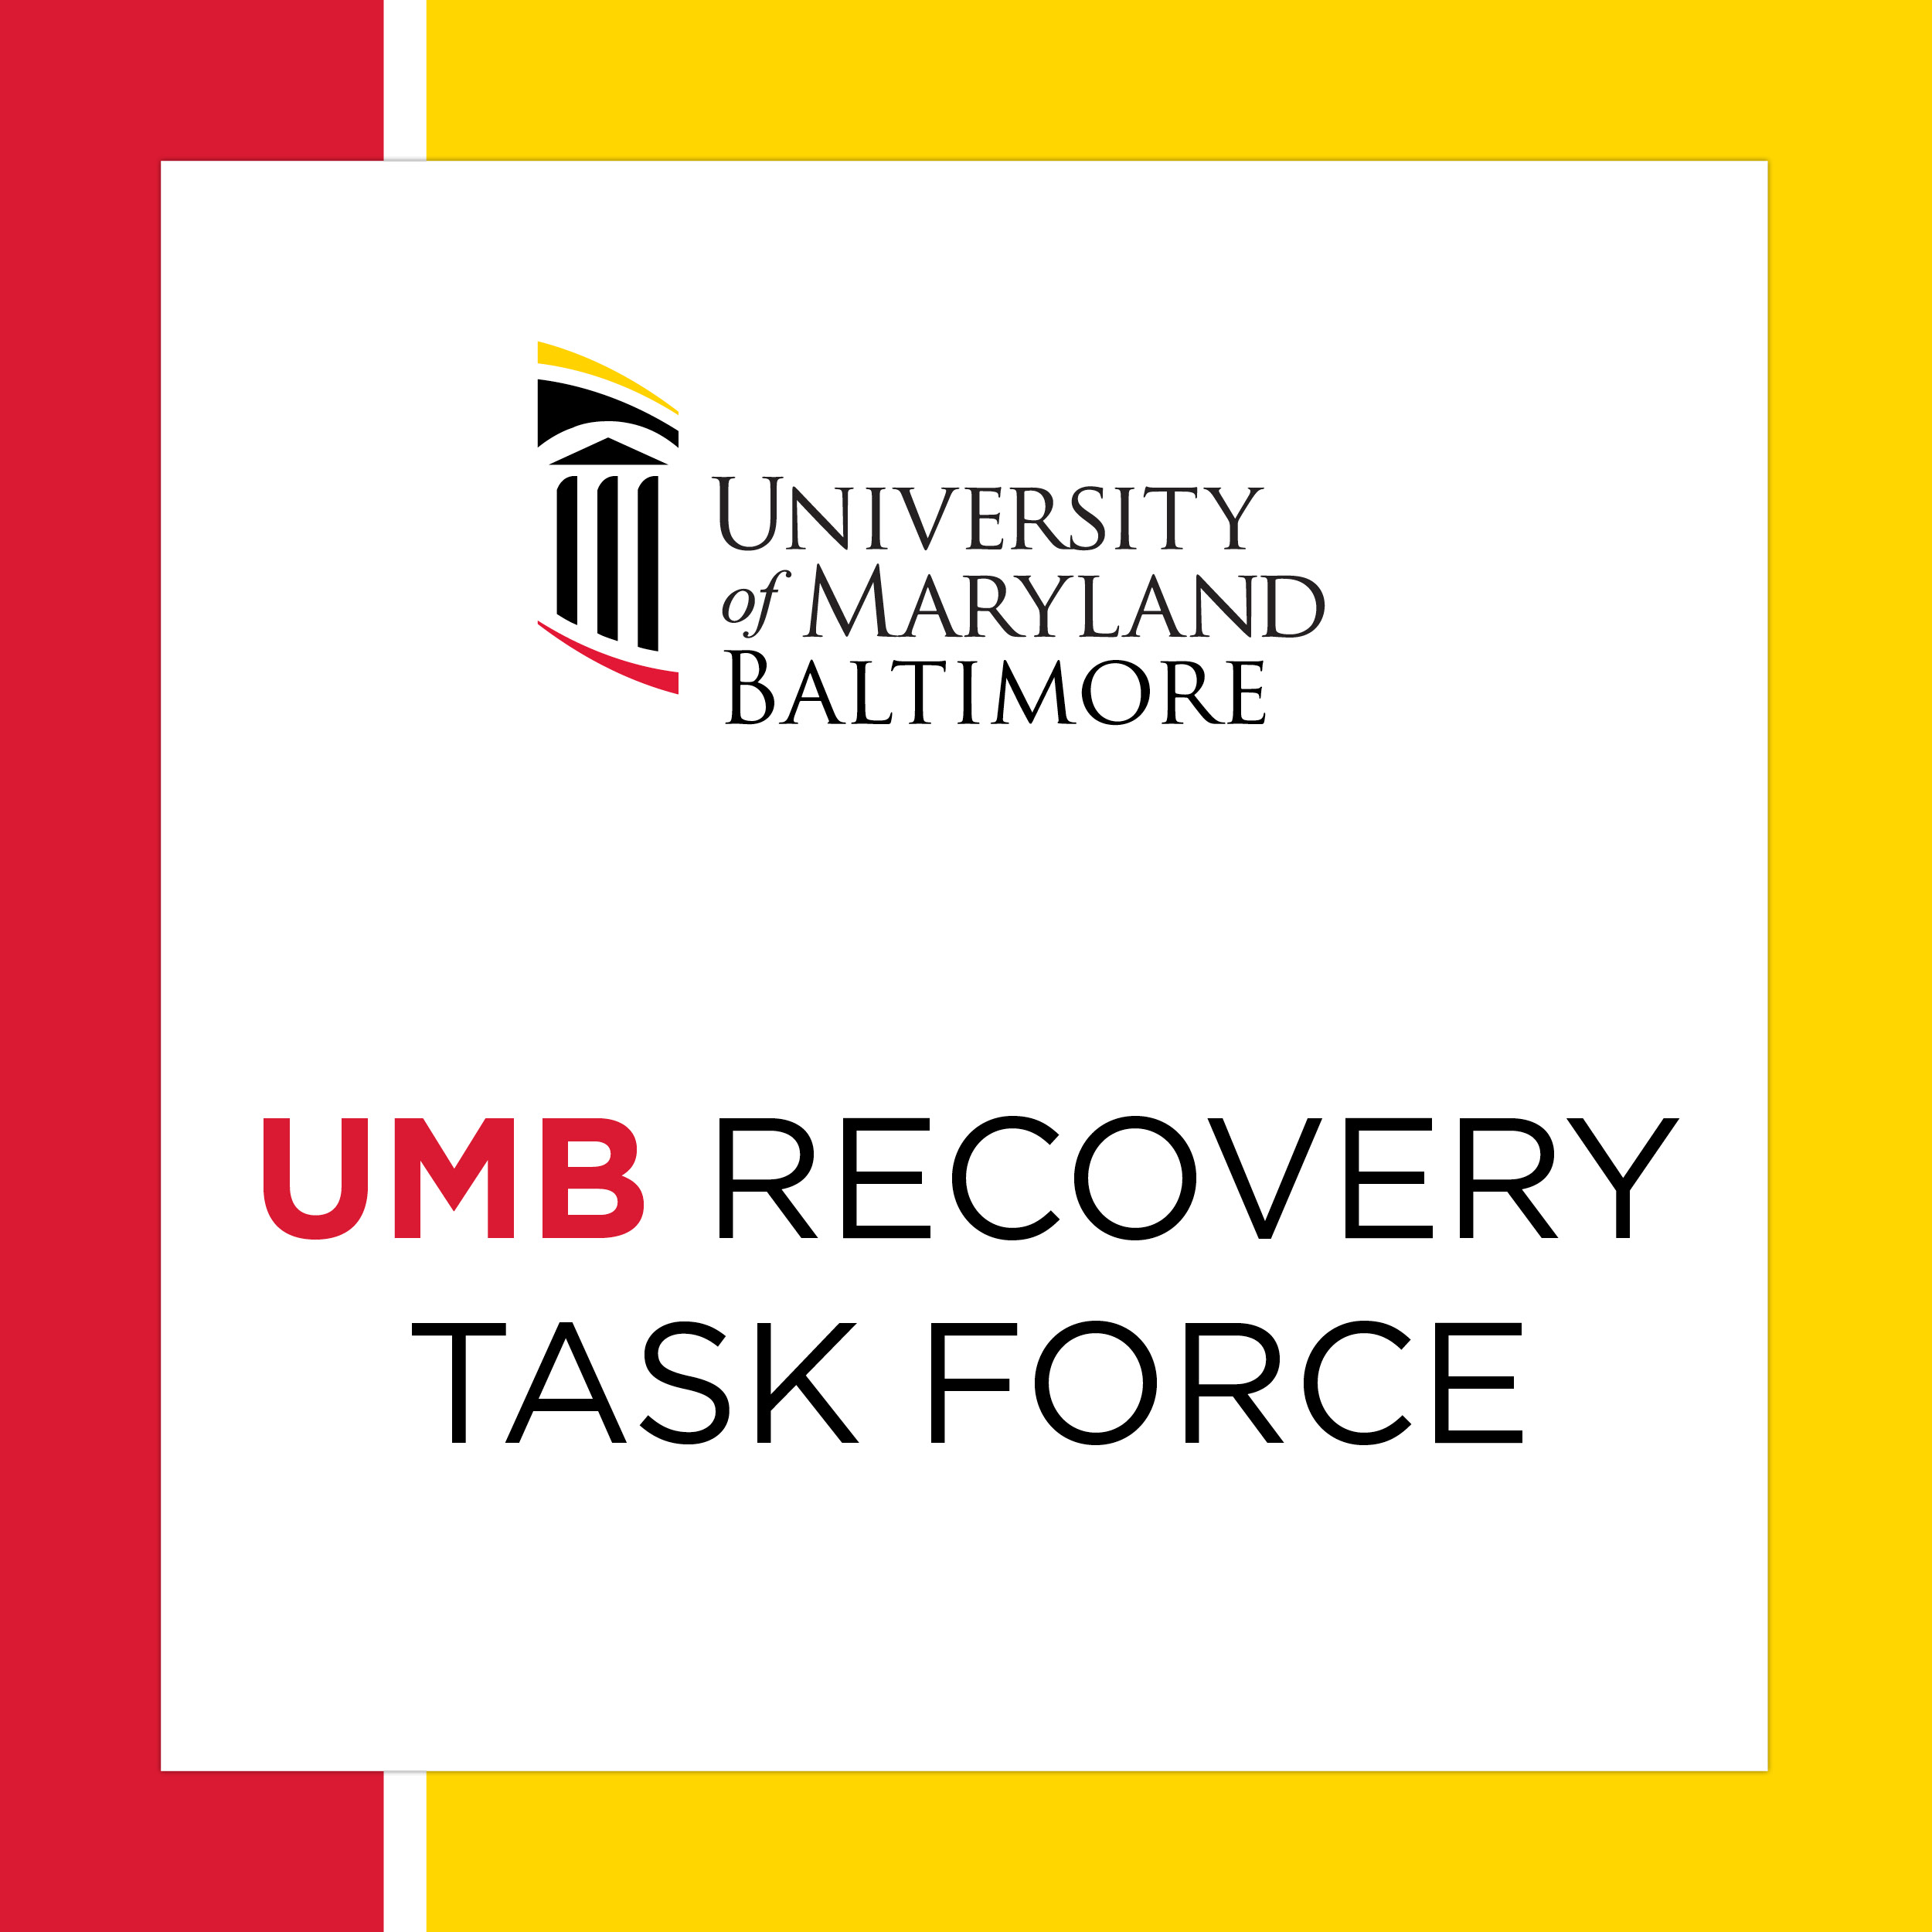 UMB Recovery Task Force graphic